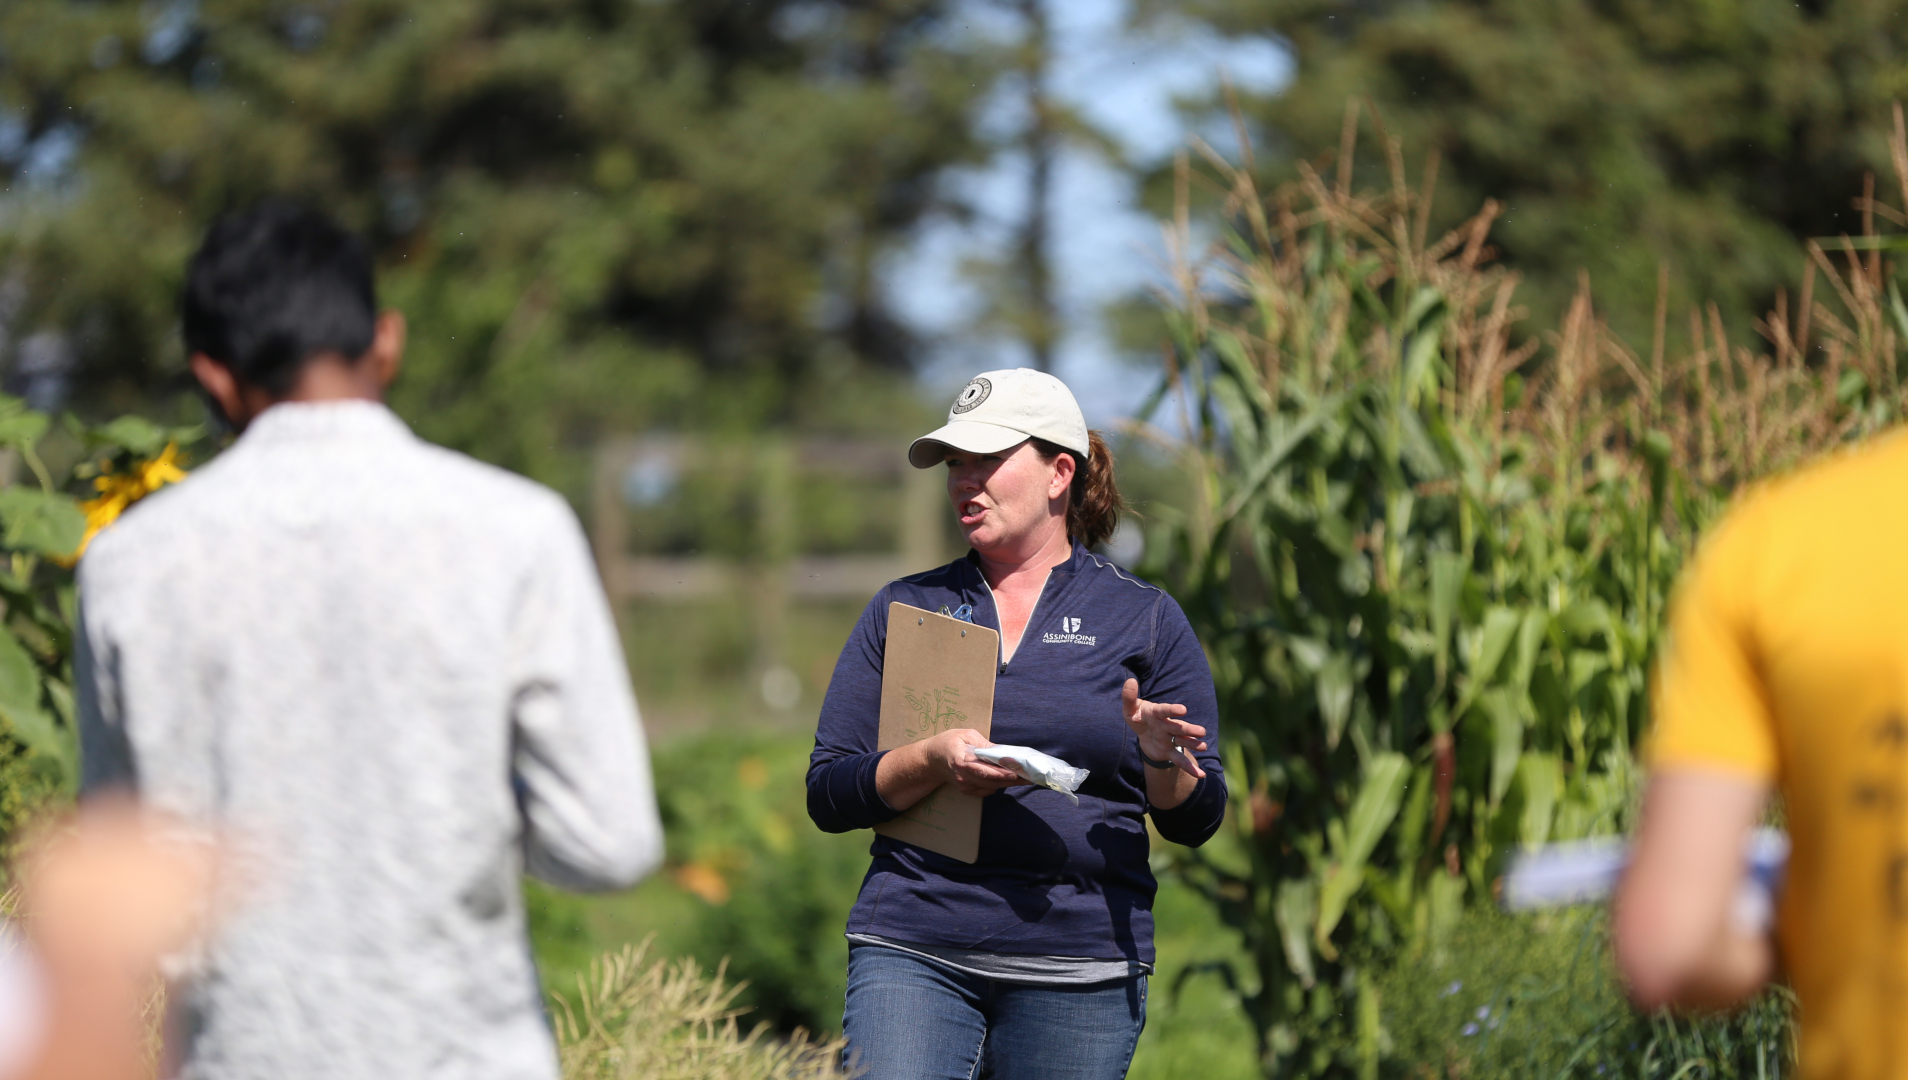 Agriculture instructor, Danielle Tichit, stands in the middle of the photo holding a clipboard. She is in focus while two students on either side of her, facing her, are blurred along with the corn crop in the background